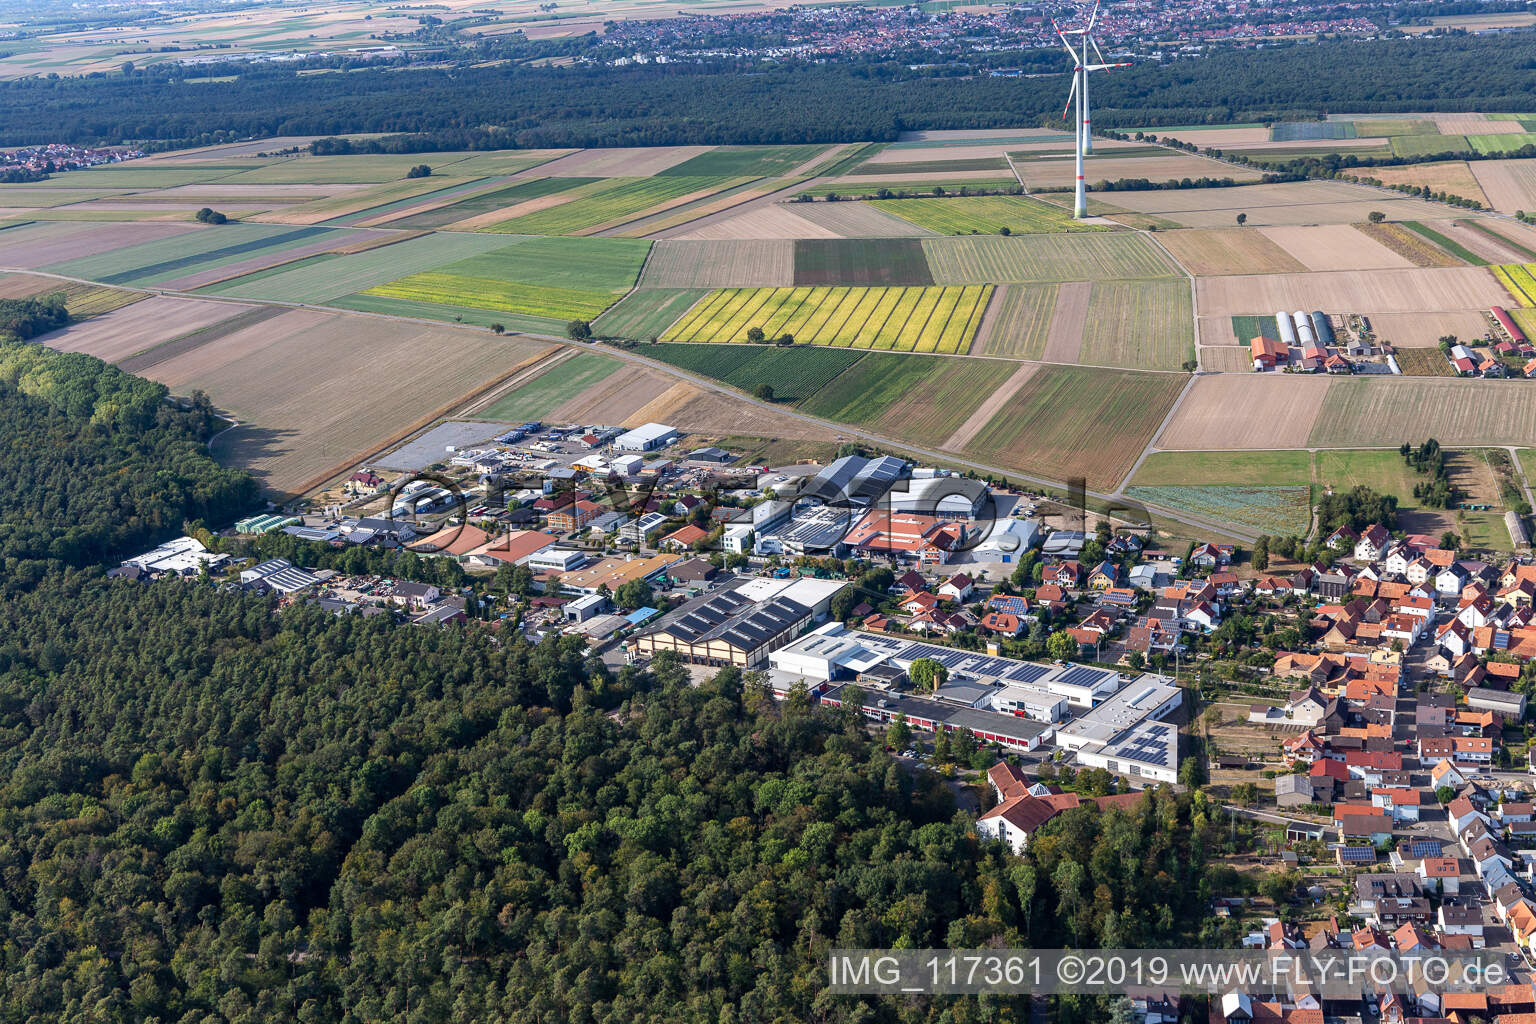 Commercial area Im Gereut, HGGS LaserCUT GmbH & Co. KG in Hatzenbühl in the state Rhineland-Palatinate, Germany from above